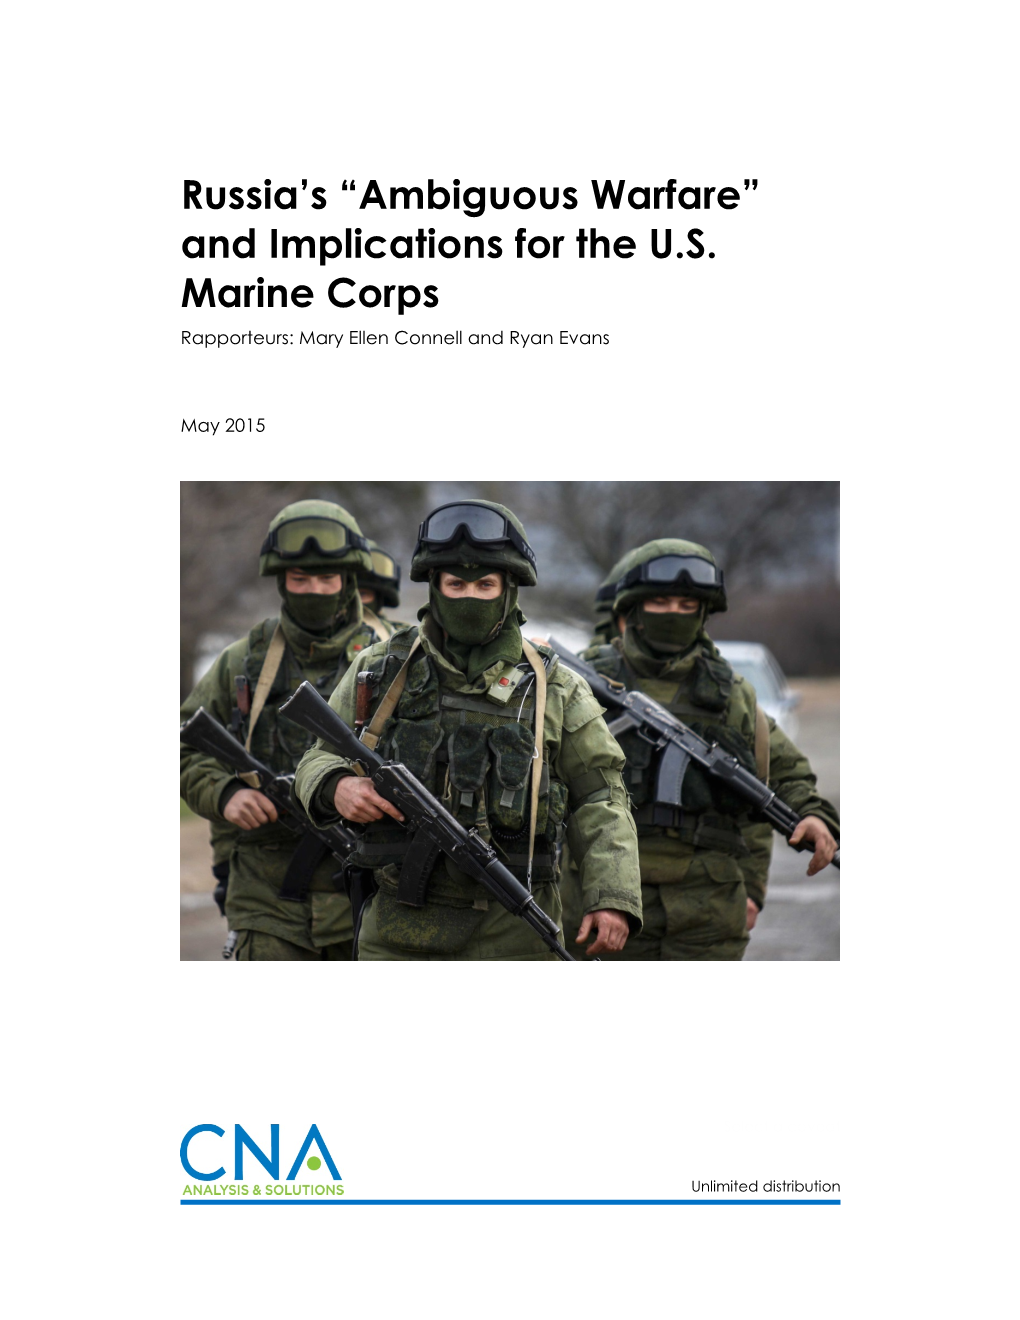 Russia's “Ambiguous Warfare” and Implications for the U.S. Marine Corps